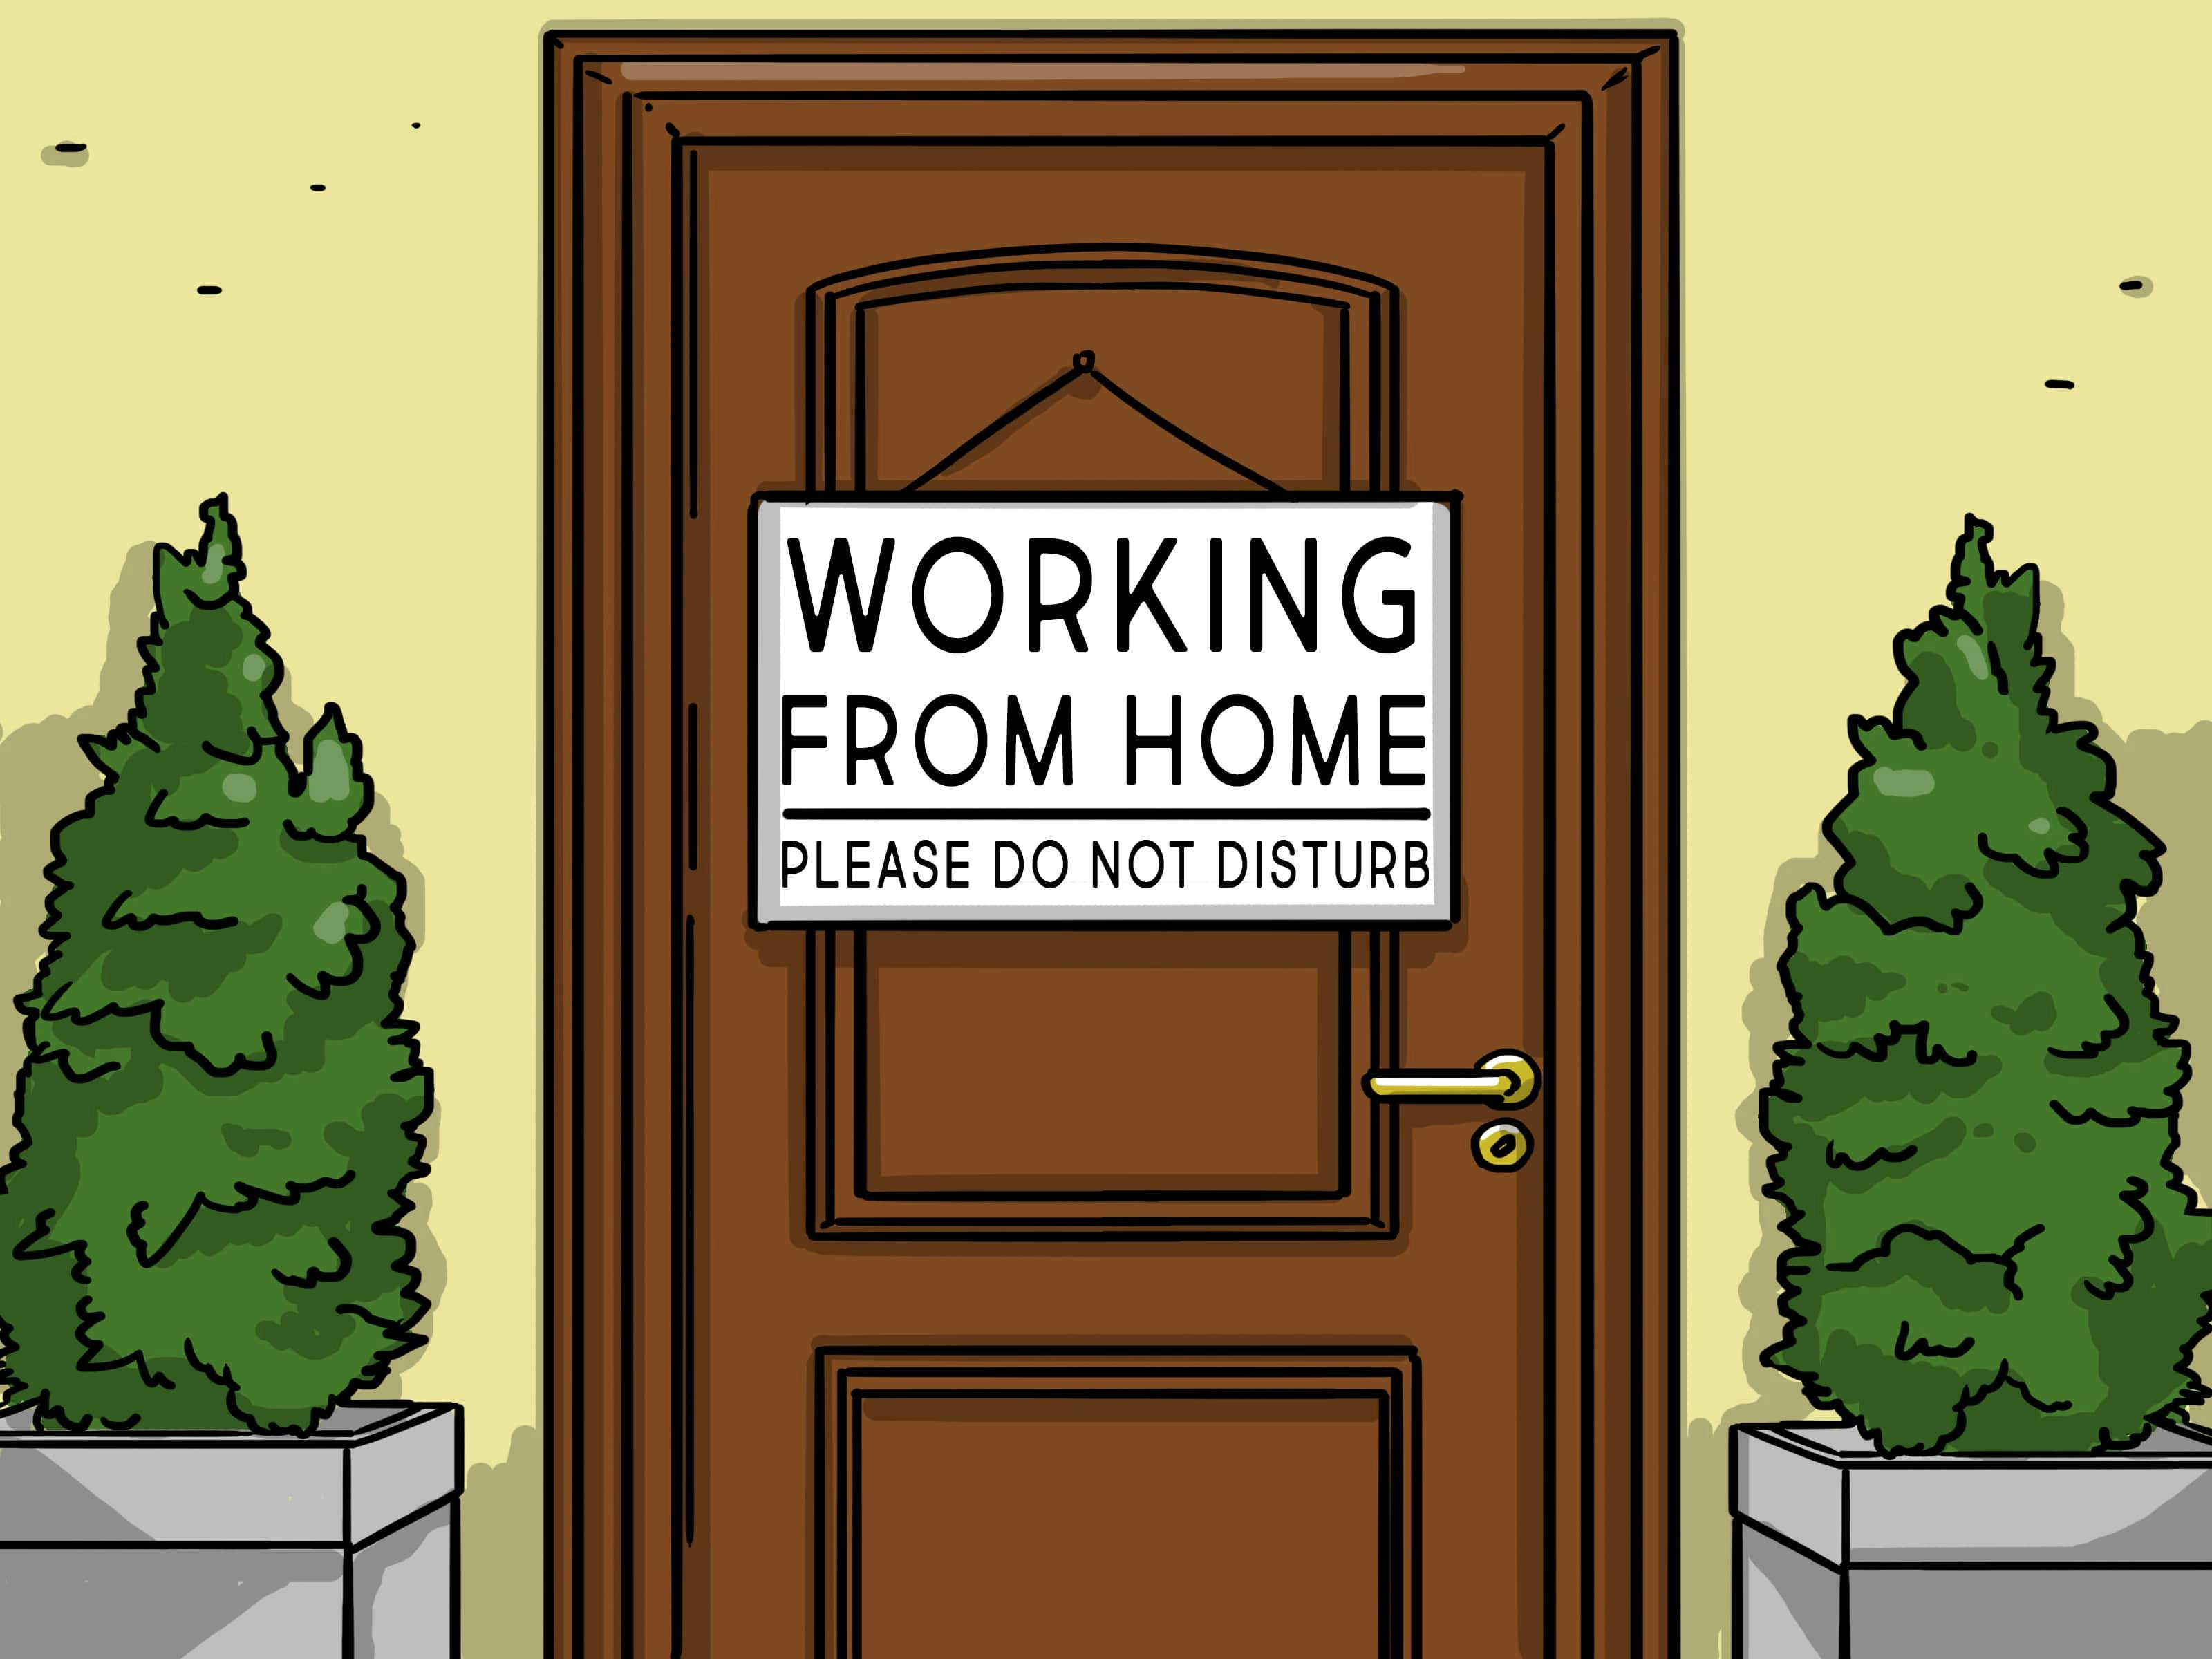 Putting a sign on the door letting people know you are busy, is a great way to maintain focus while WFH.